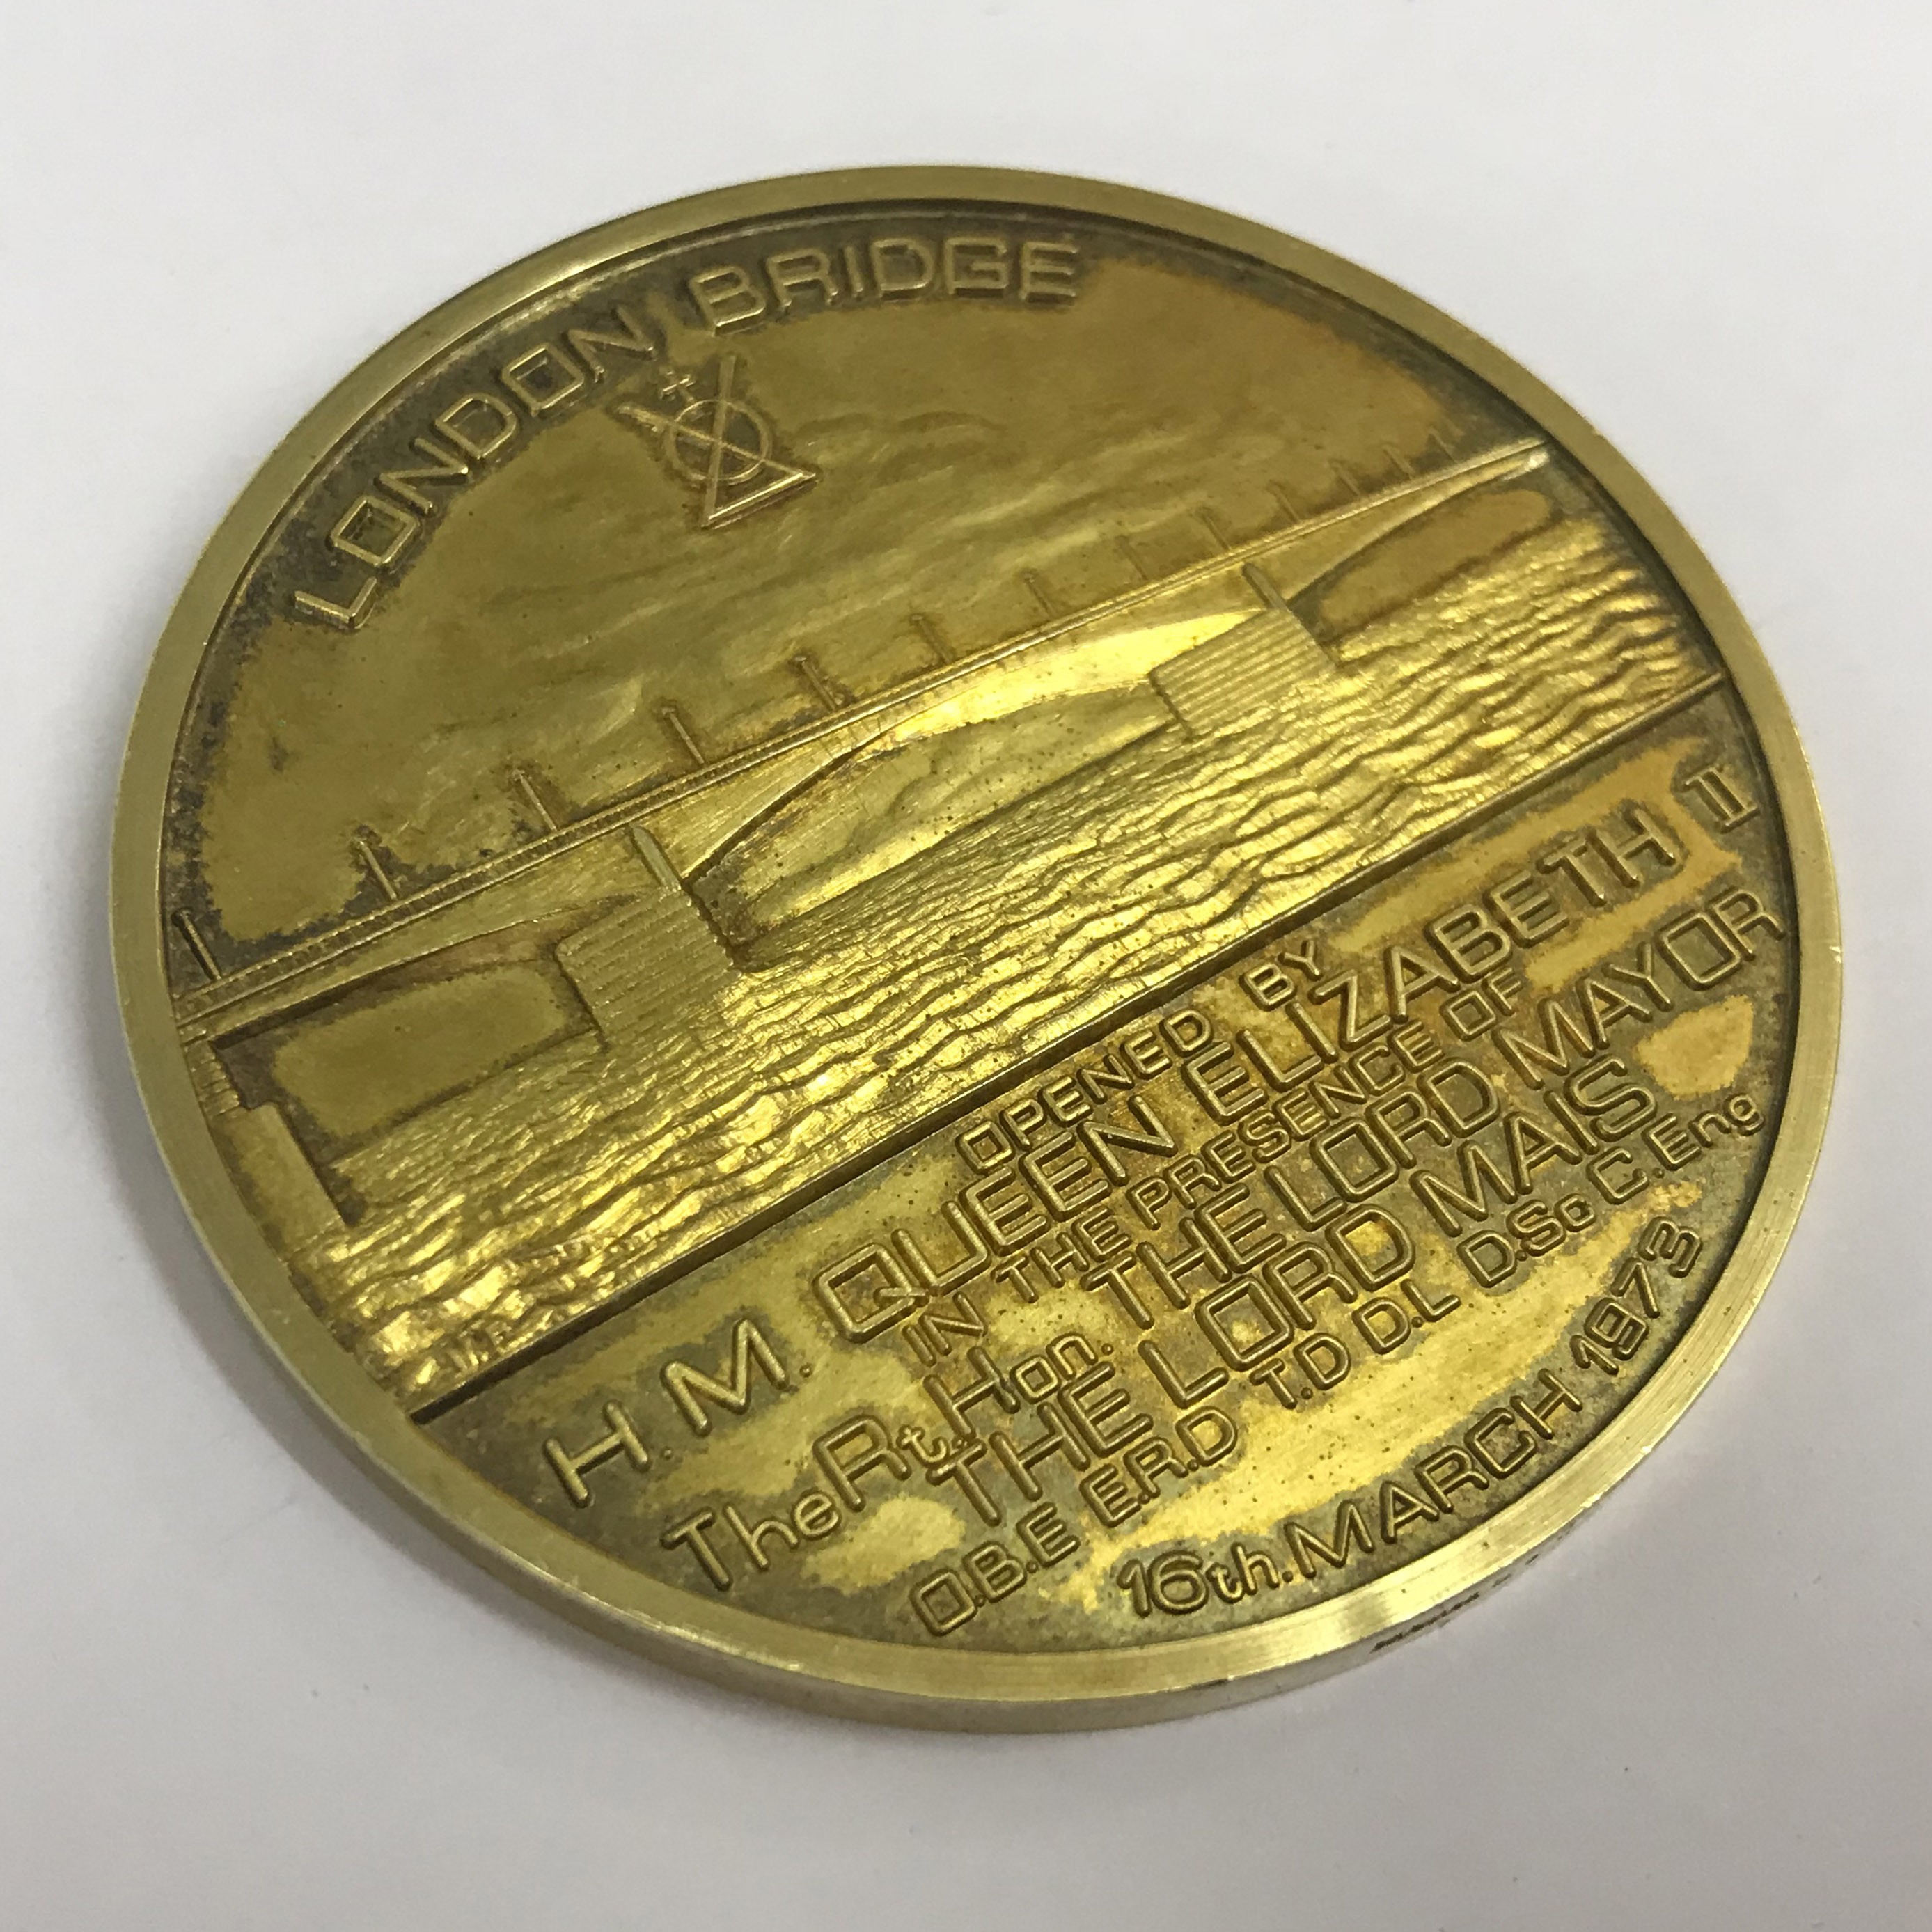 CORPORATION OF THE CITY OF LONDON - LONDON BRIDGE SILVER MEDAL - Image 2 of 2